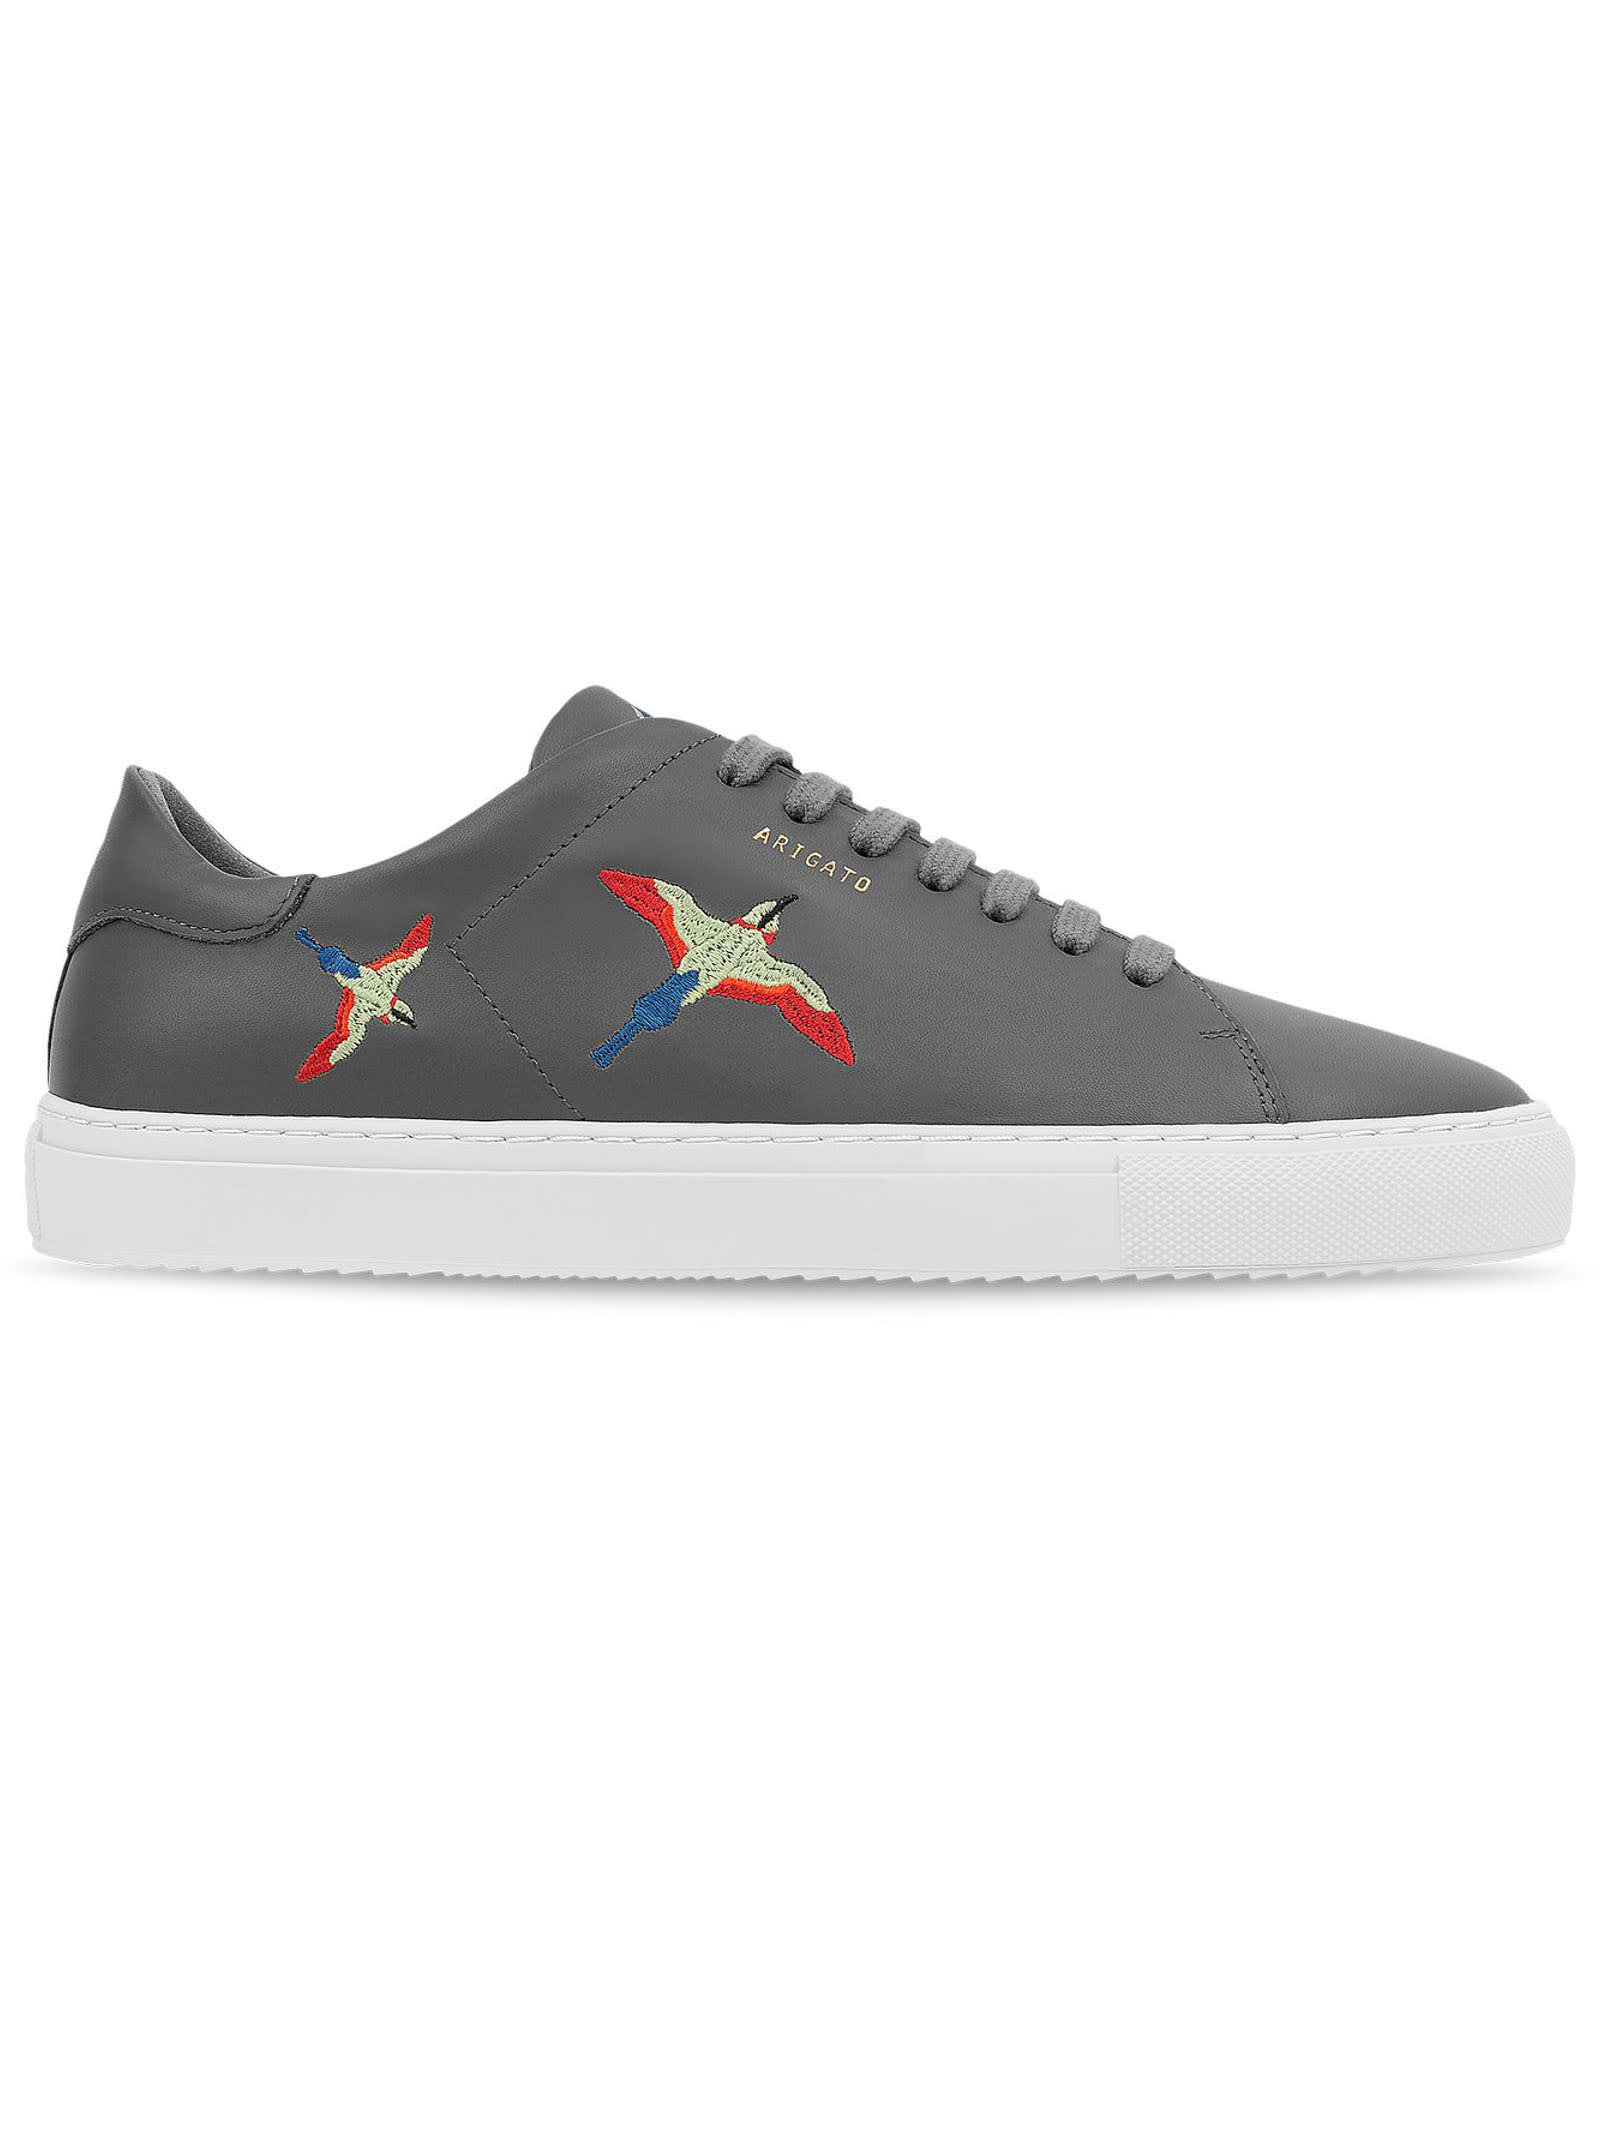 Axel Arigato Grey Leather Sneakers